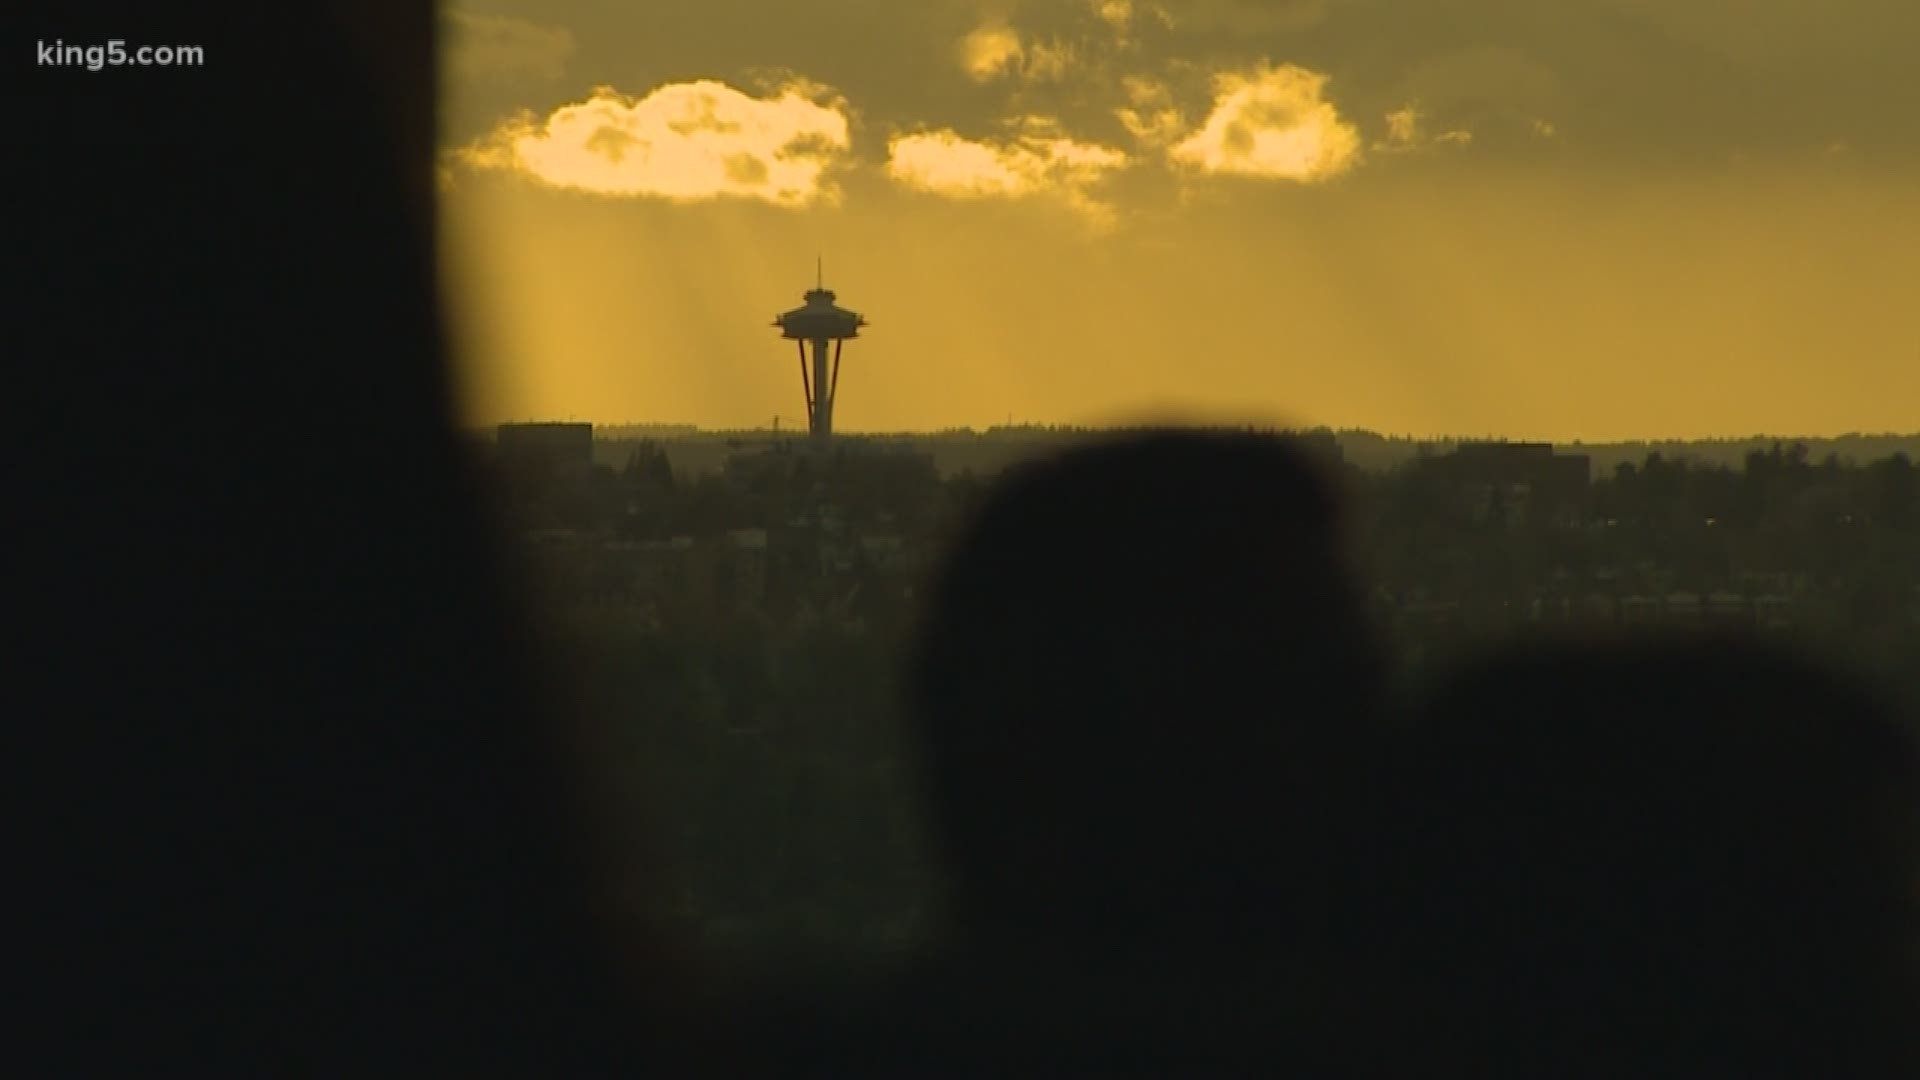 Amazon's worldwide operations team, which is based in Seattle, will move to Bellevue by 2023. In a statement, the tech giant praised the Eastside city for its "business-friendly environment." KING 5's Natalie Swaby reports.